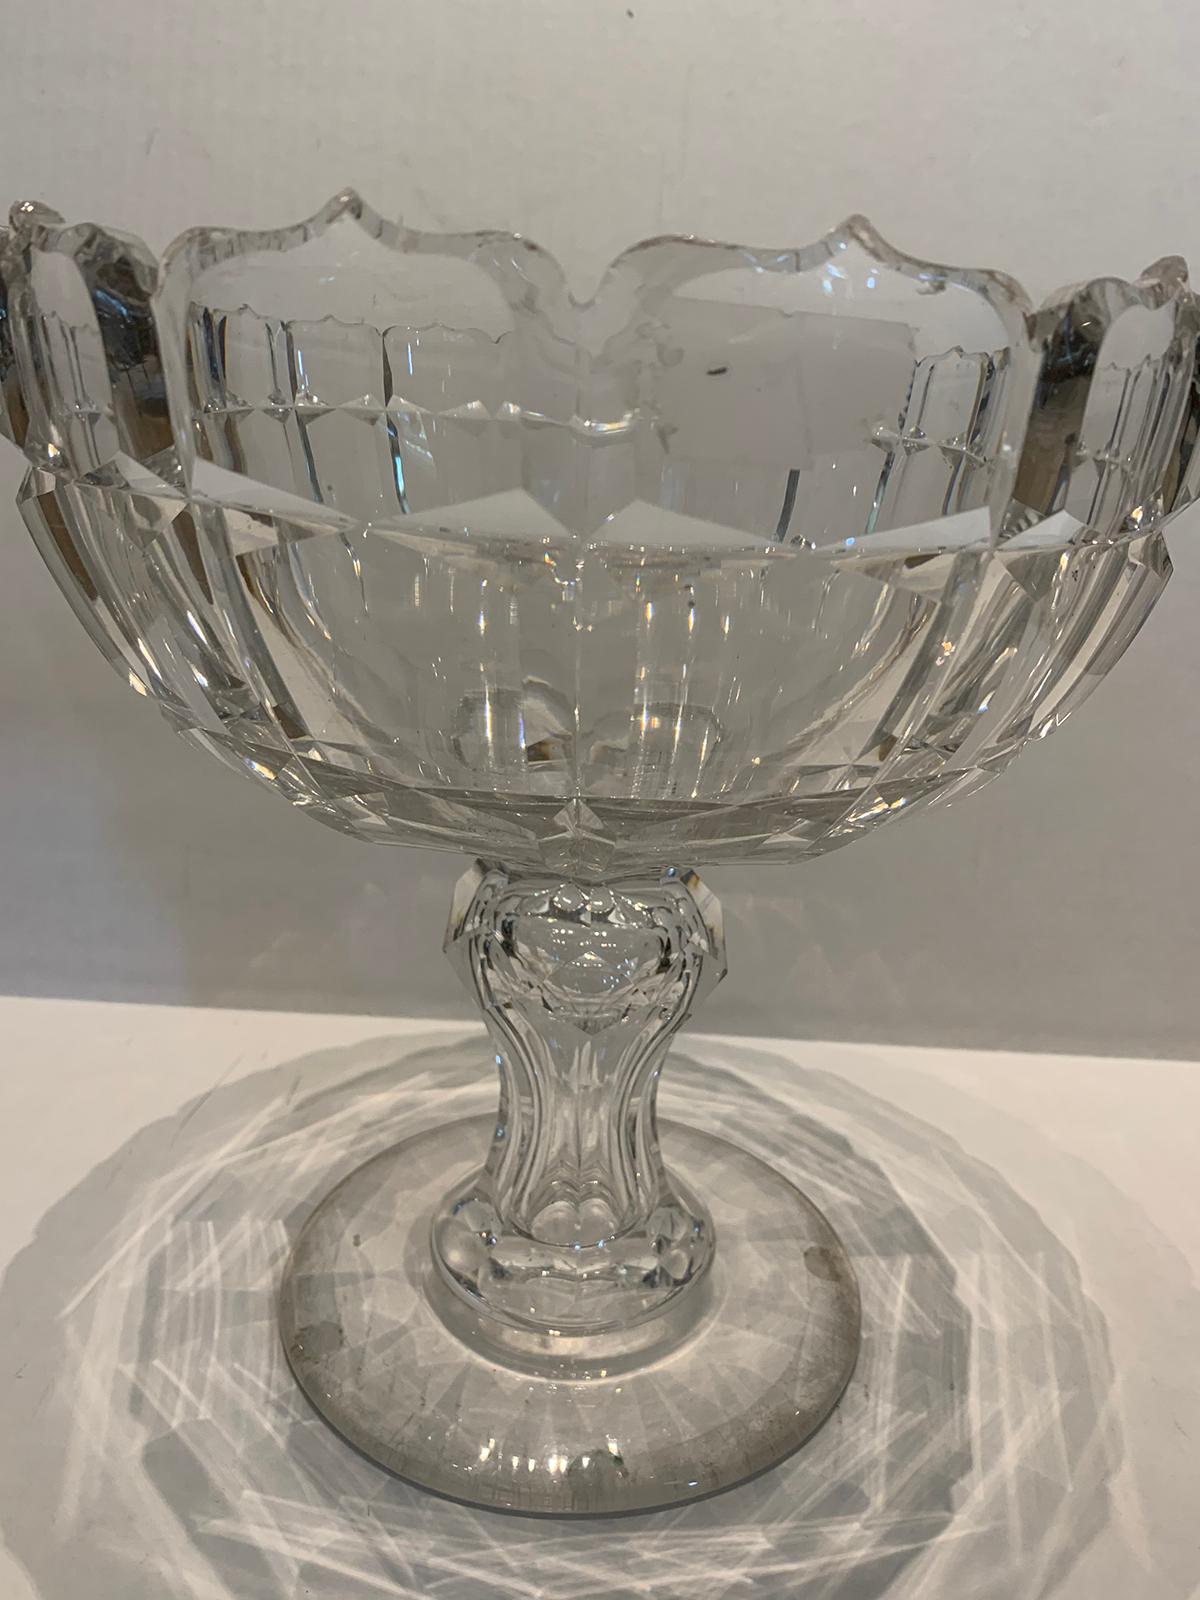 19th-20th Century Irish Crystal Compote or Pedestal Bowl 2